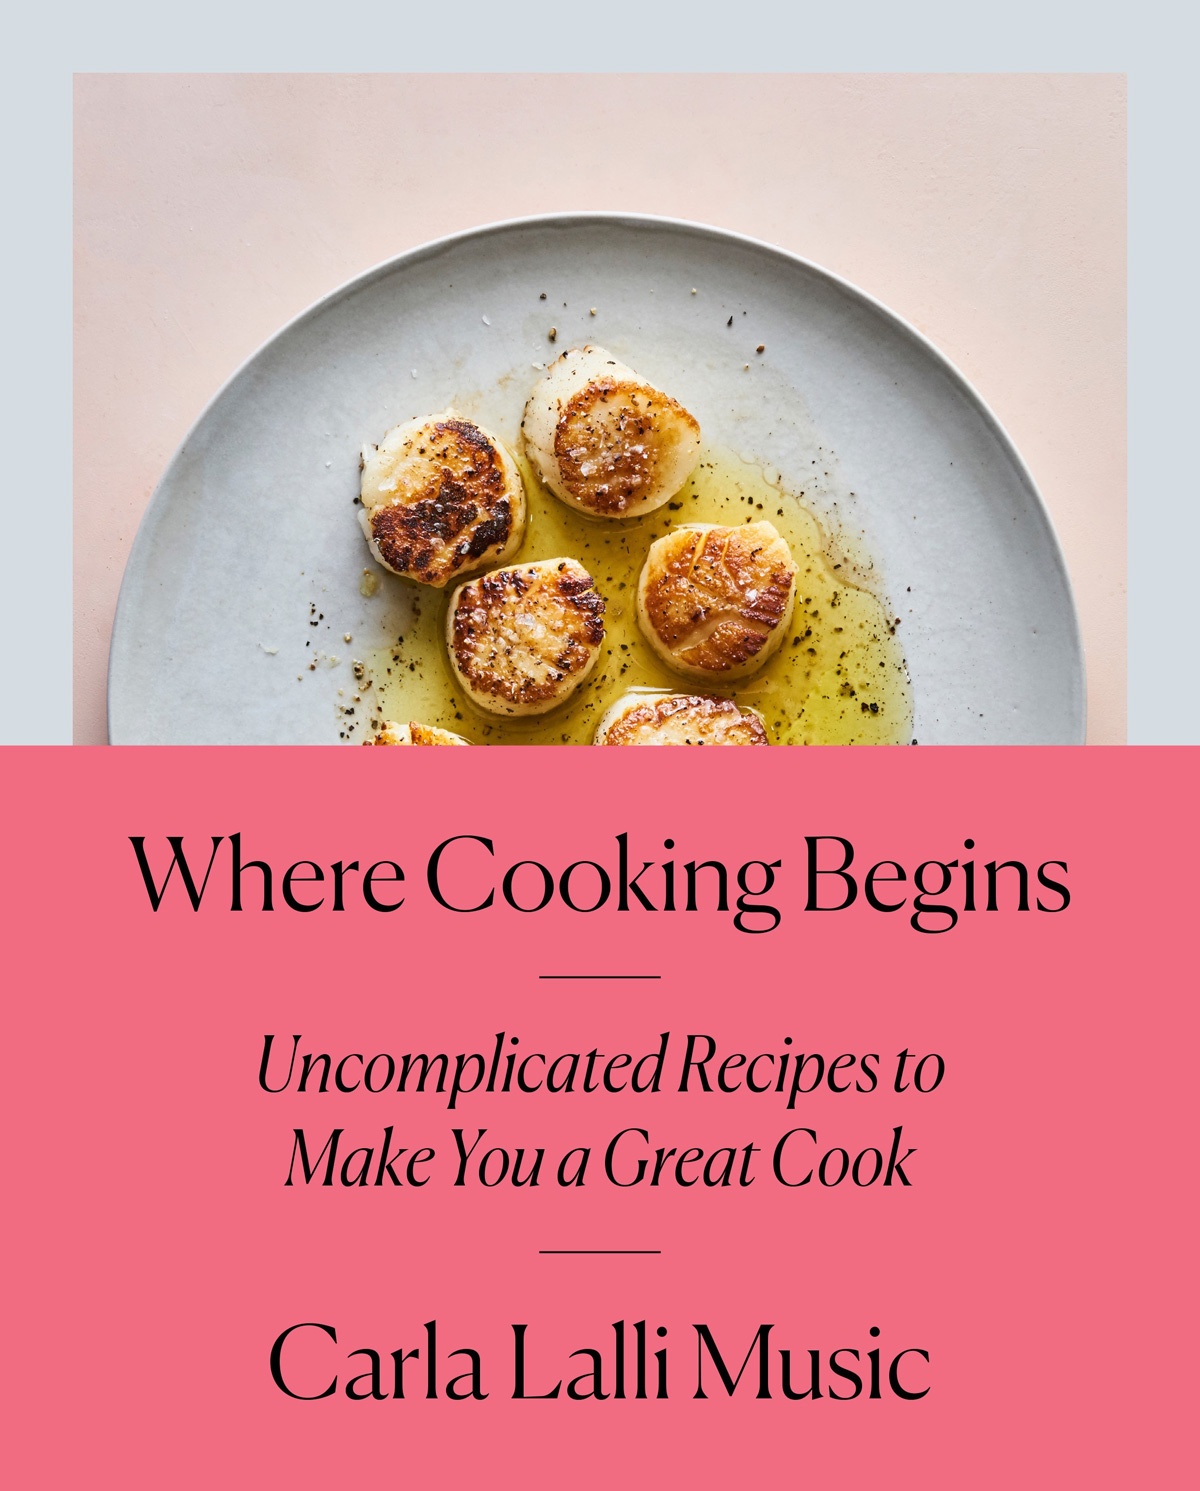 Book cover of Where Cooking Begins by Carla Lalli Music